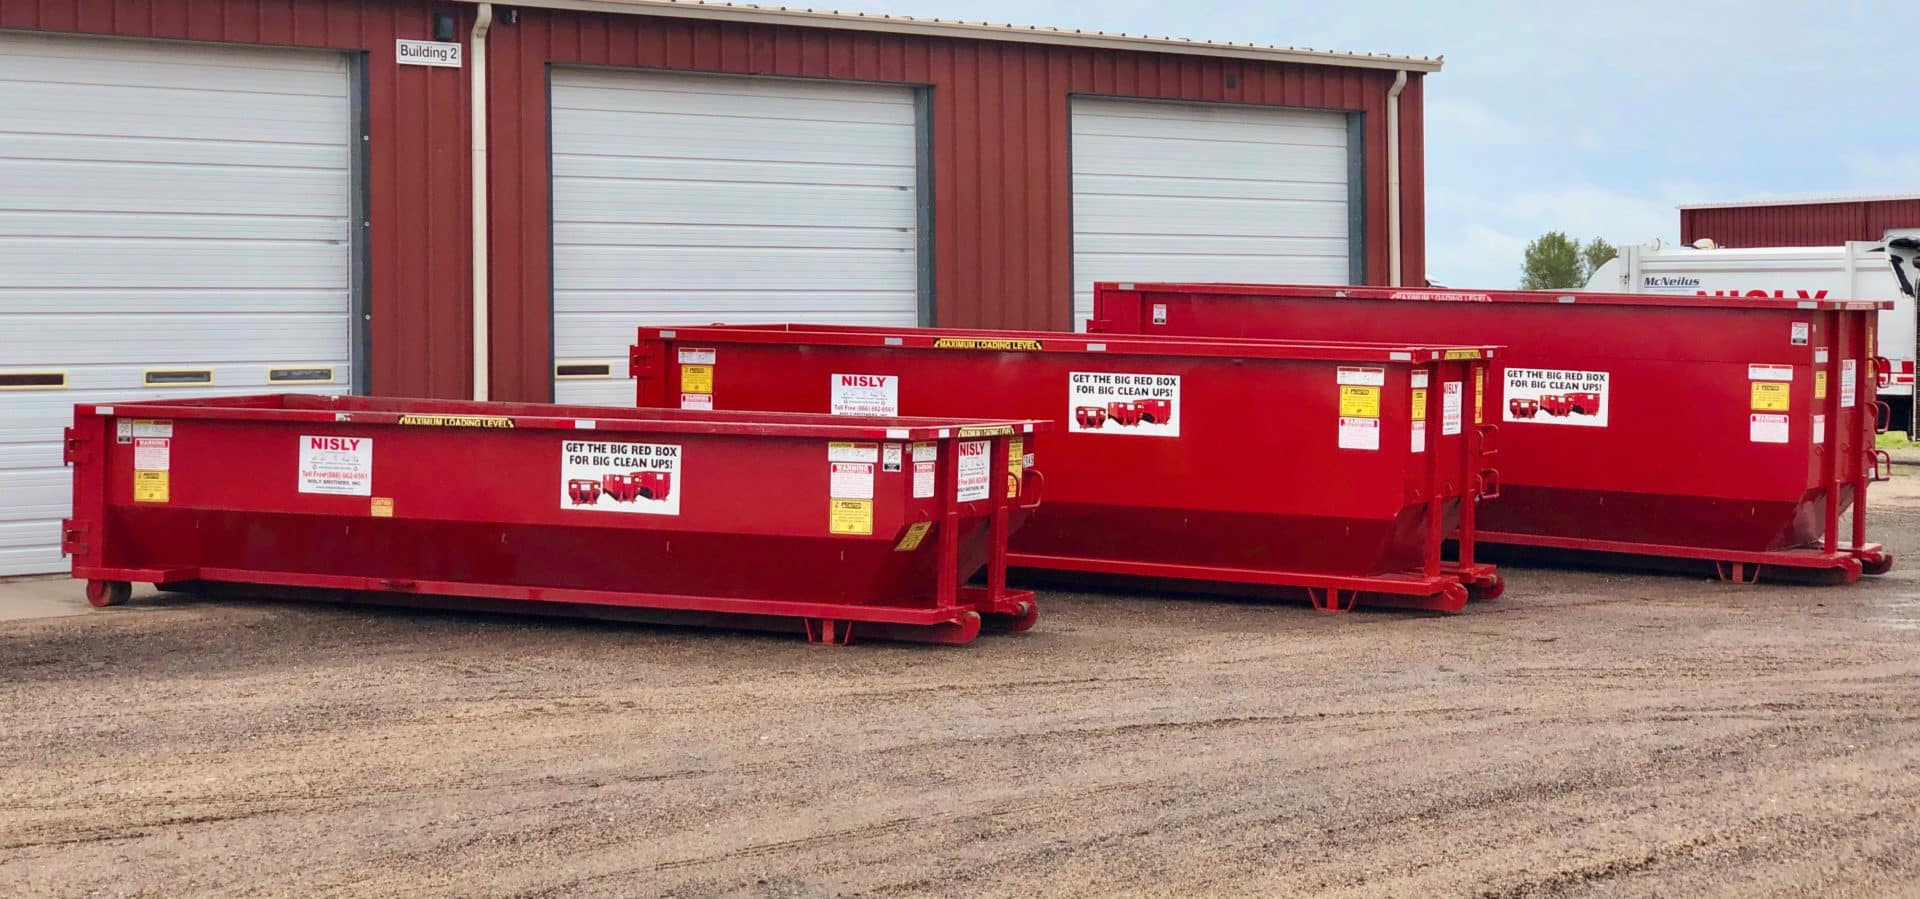 commercial roll off dumpsters for construction and brush cleanup in kansas